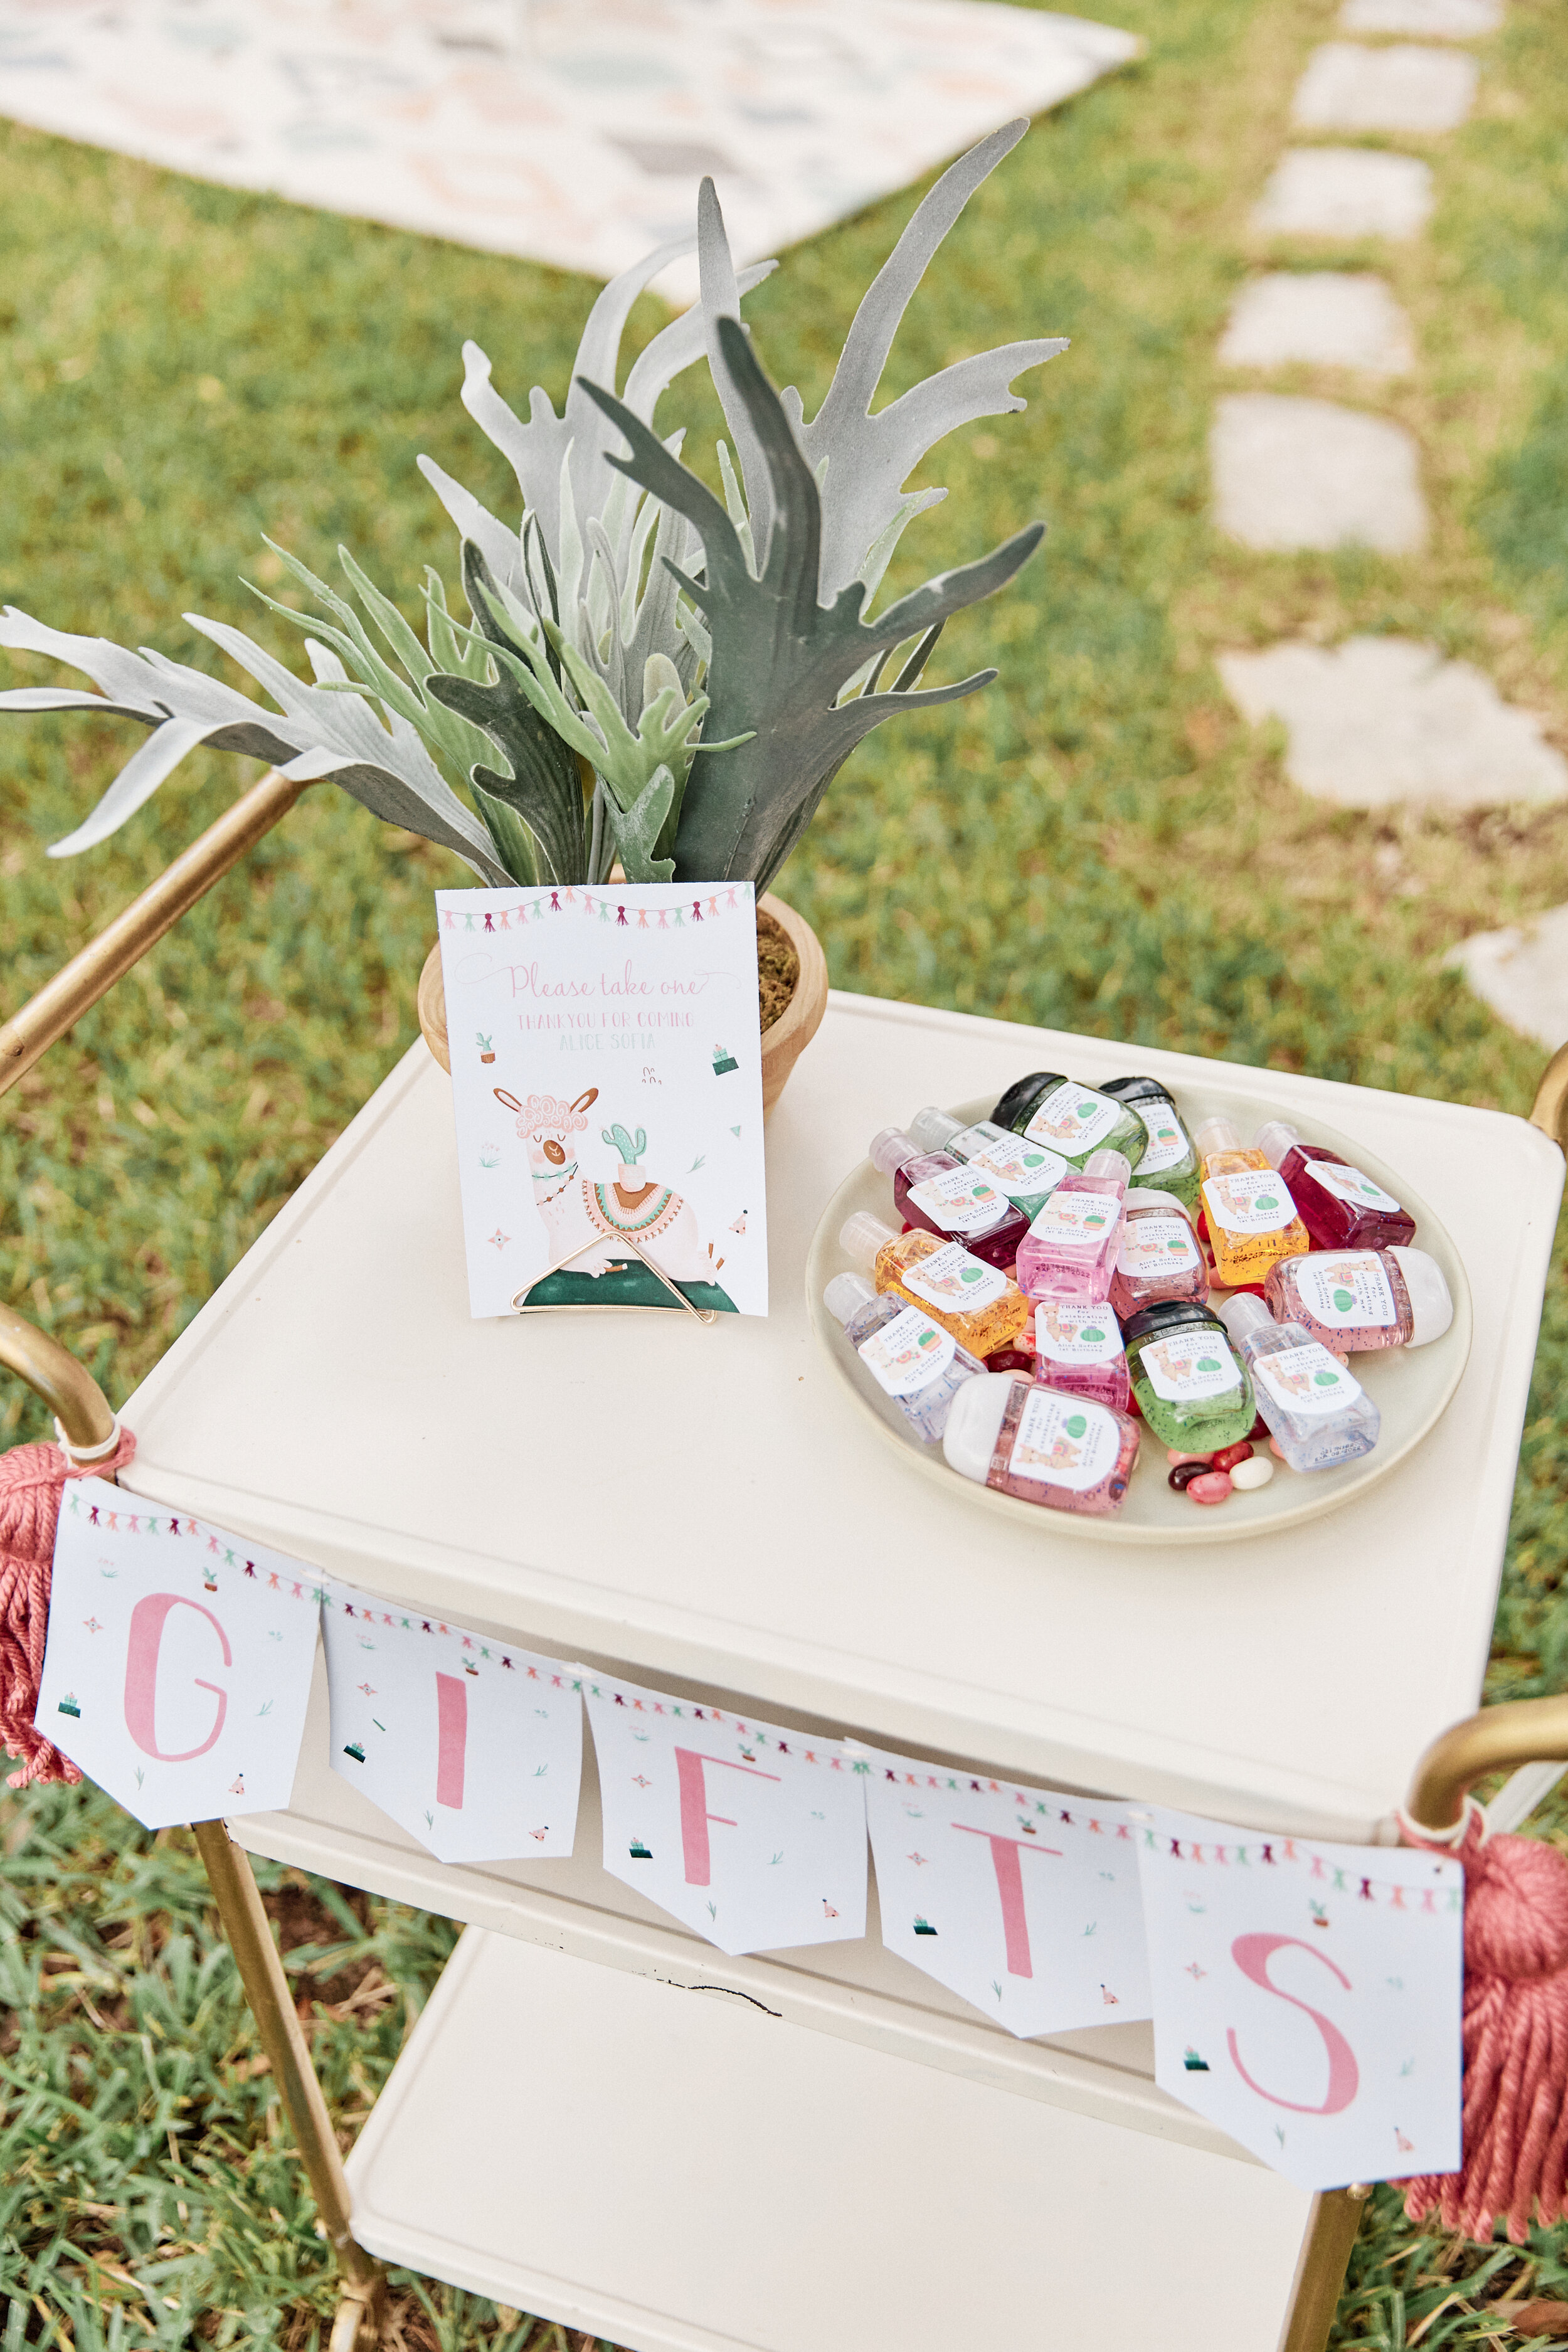 Llama Picnic Party Sanitizer Station - get details and more party inspiration now at minteventdesign.com!